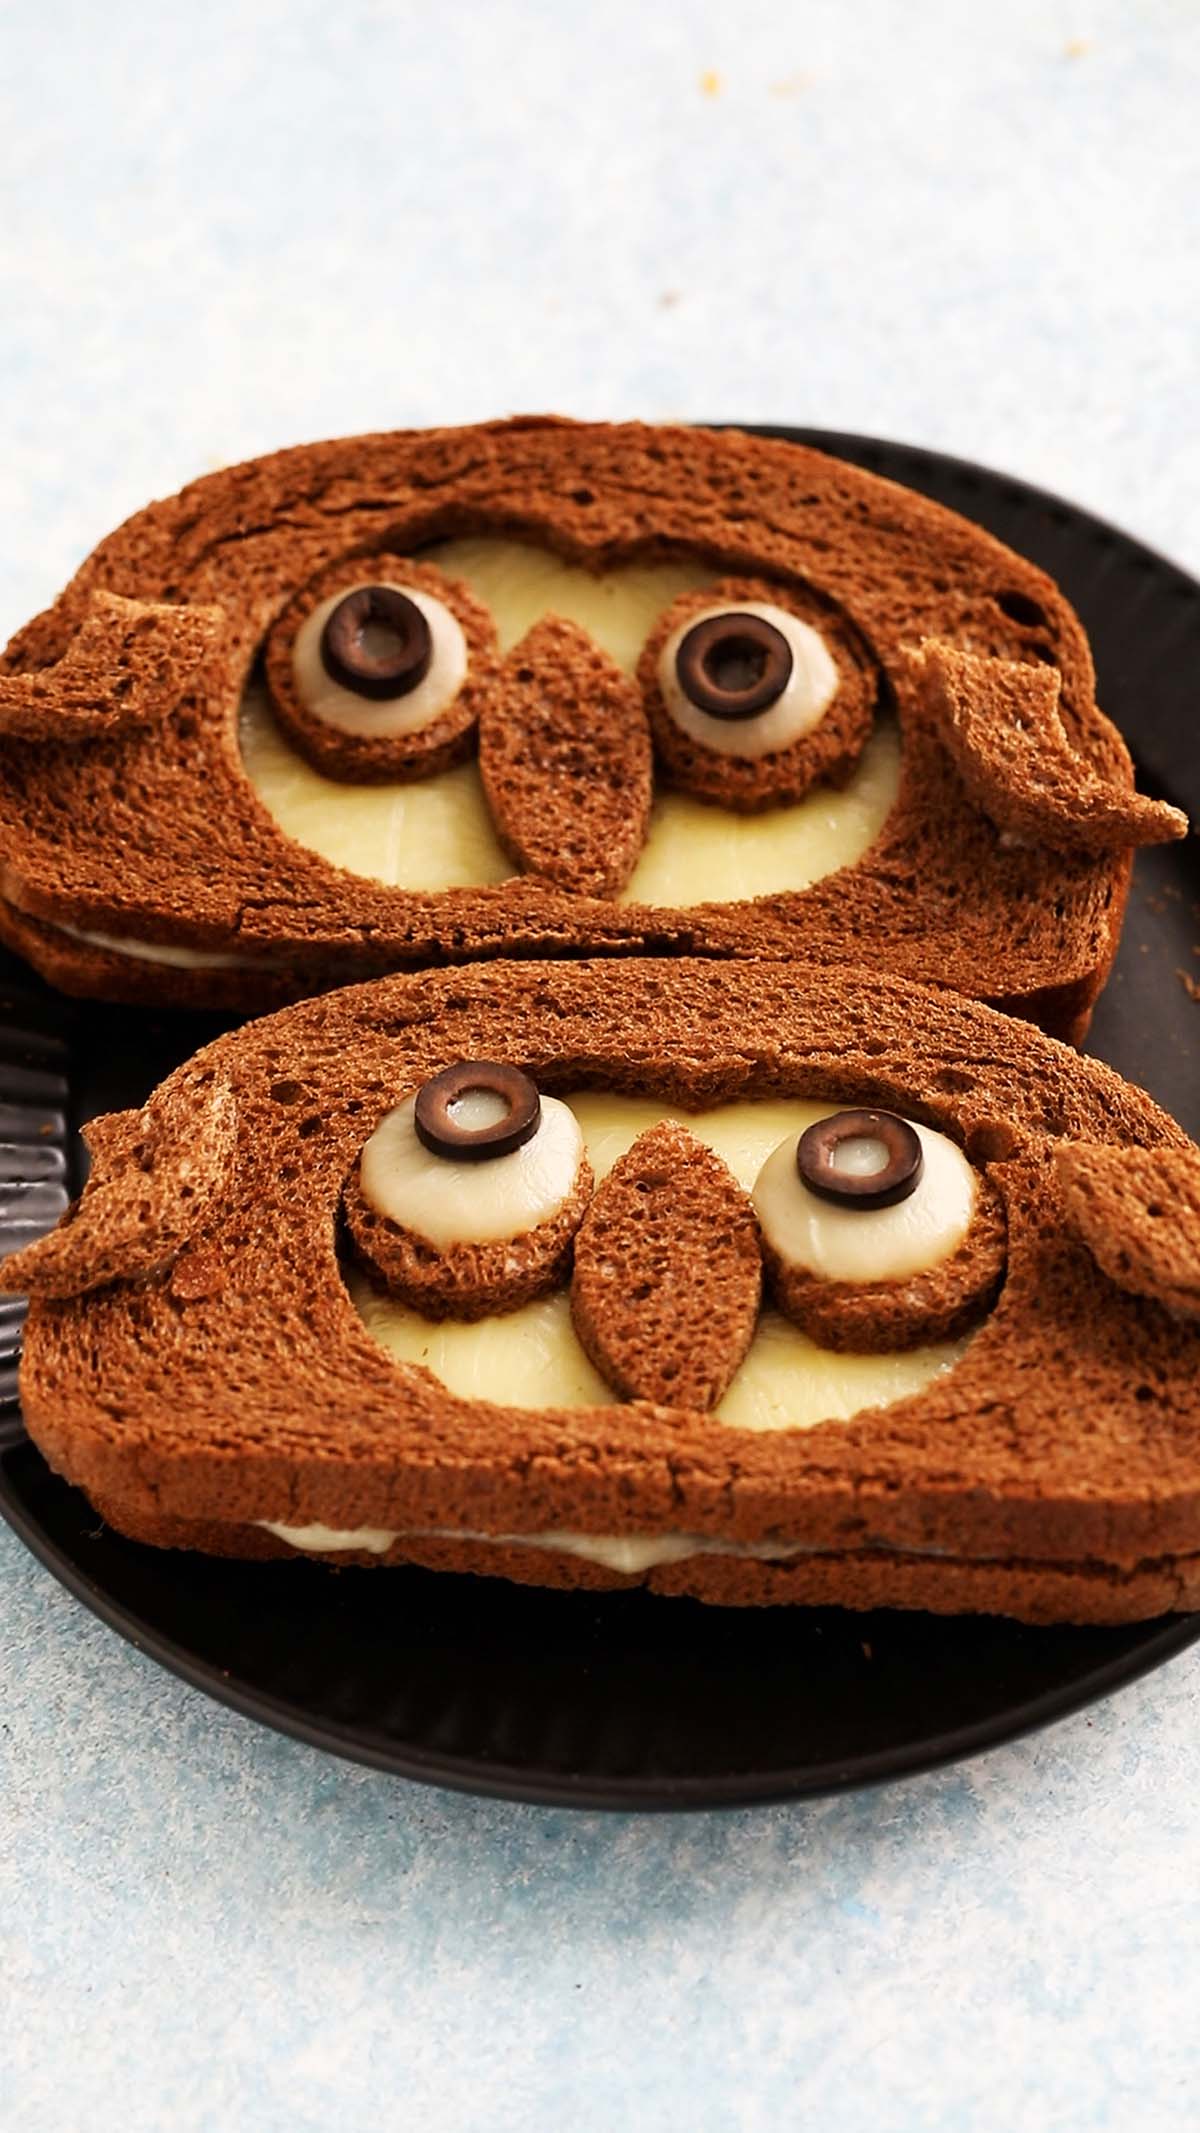 2 owl shaped sandwiches placed on a black plate.